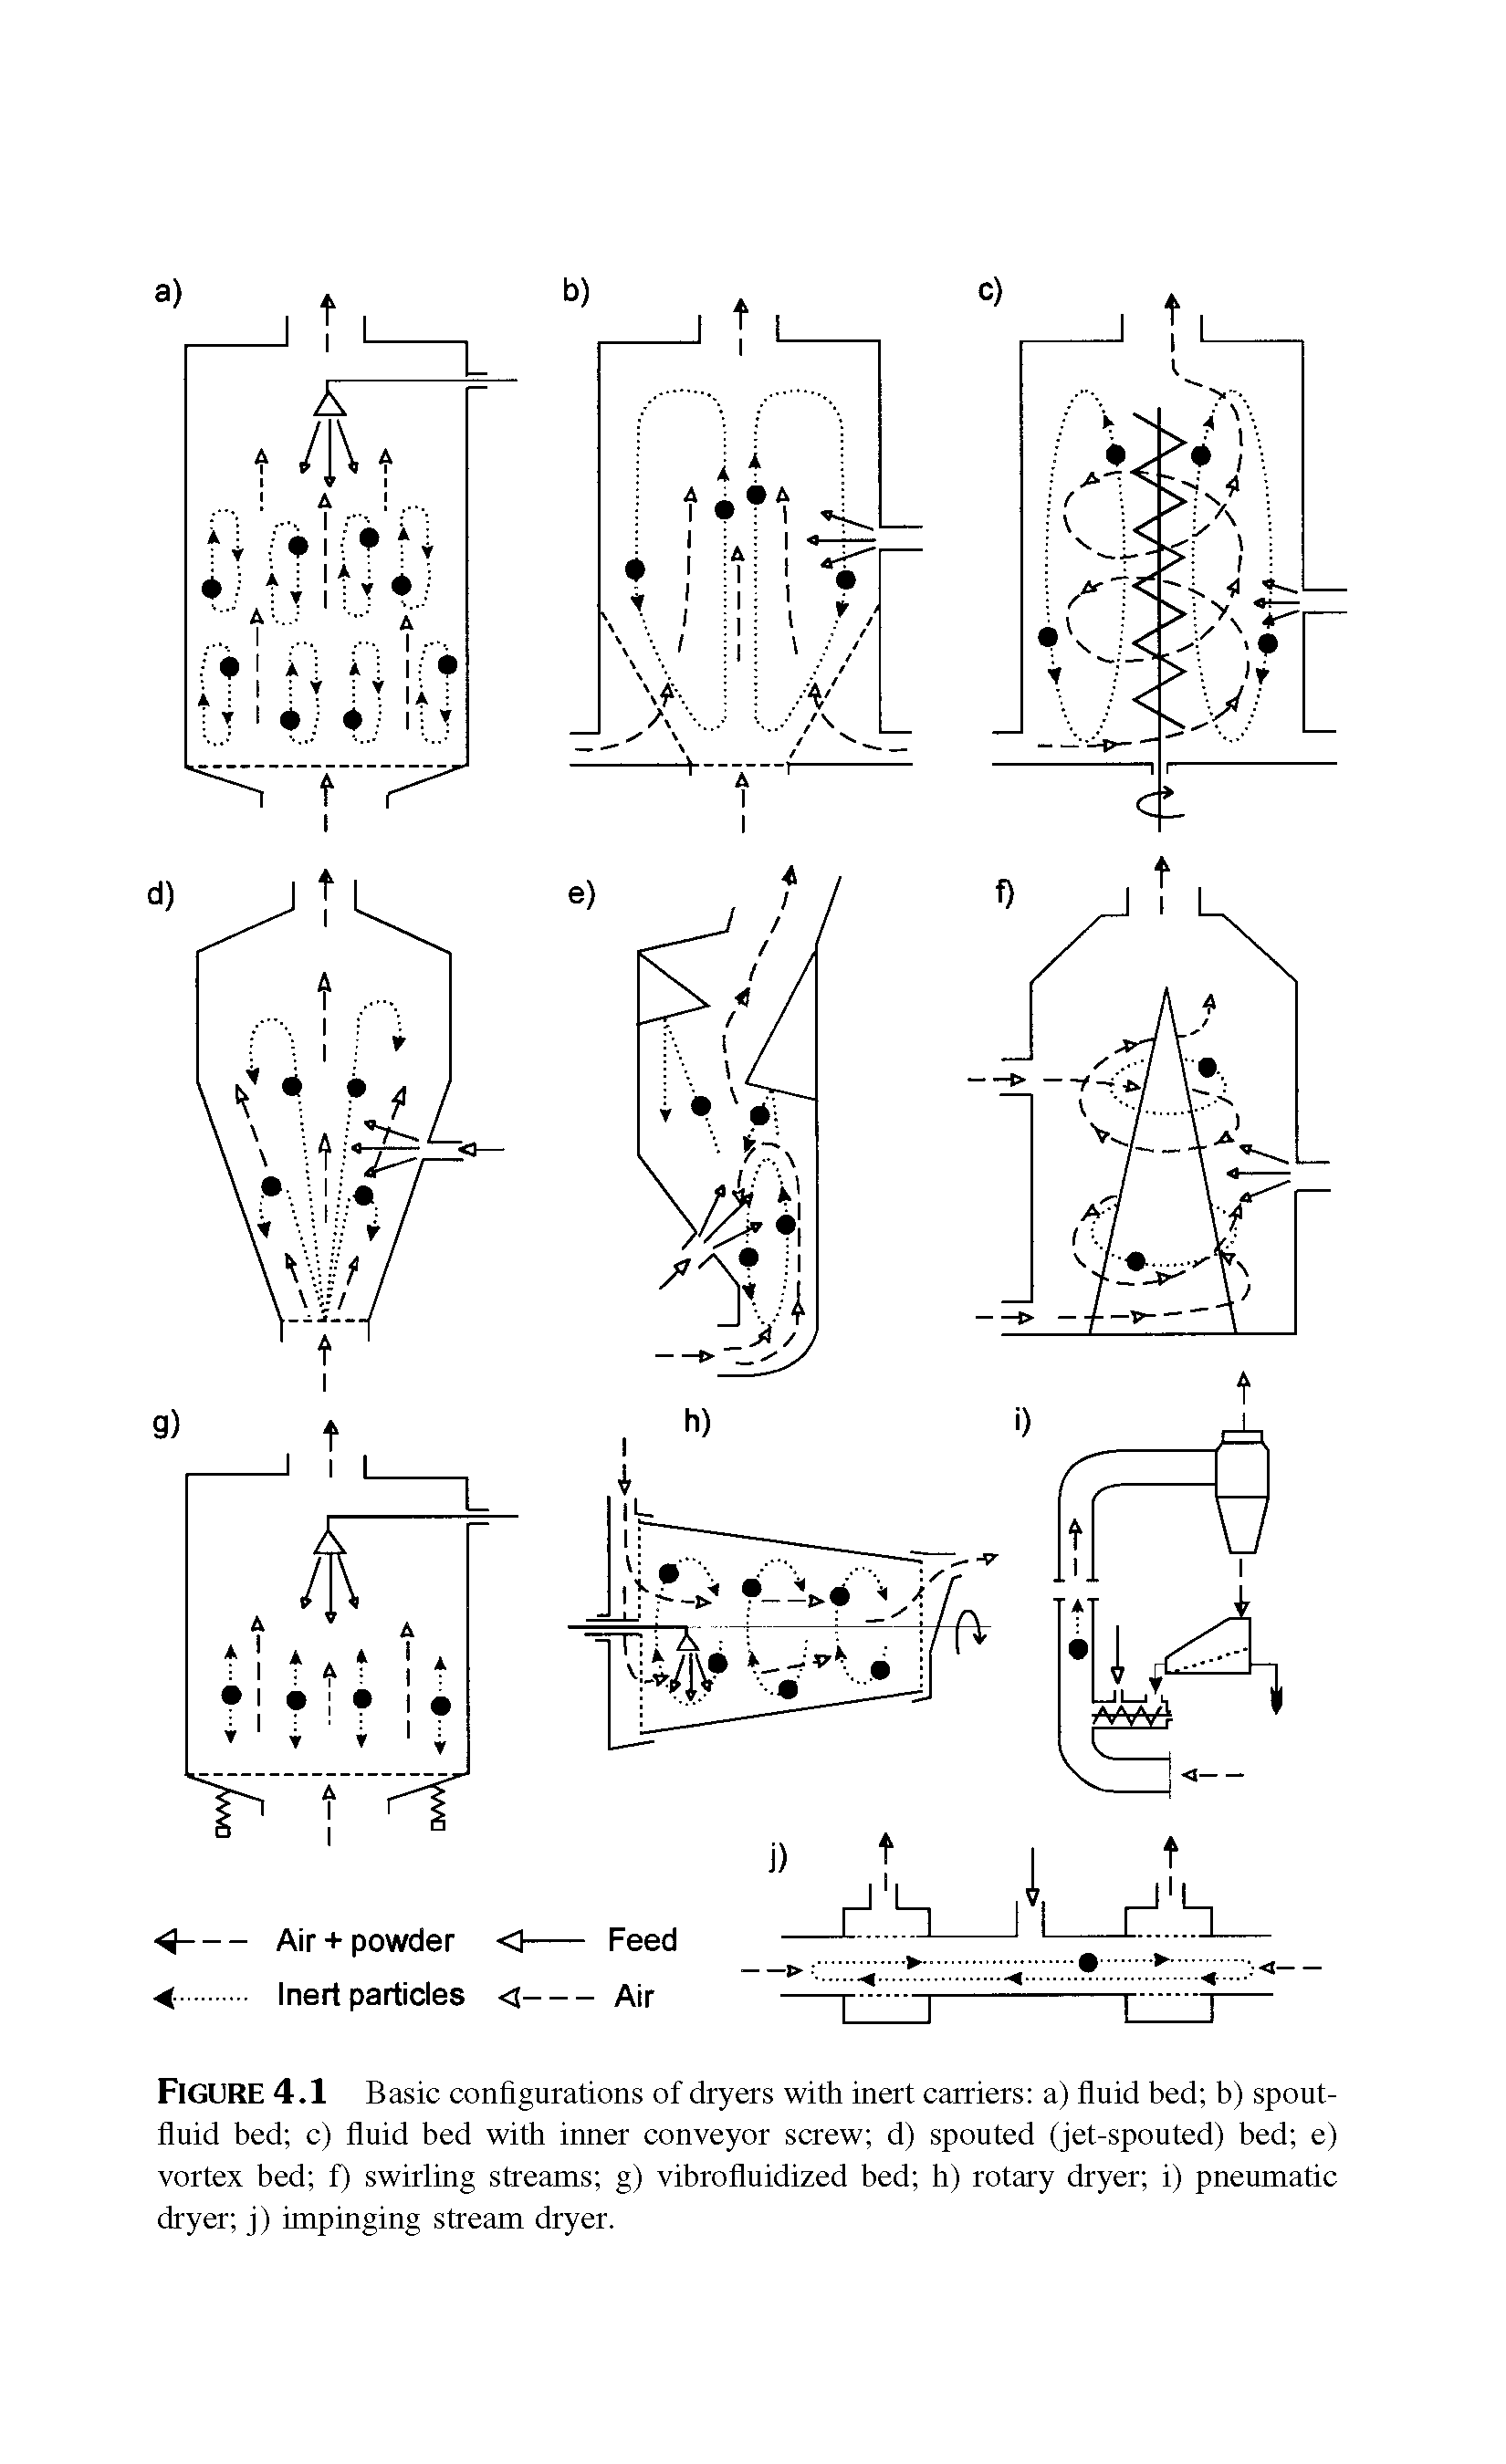 Figure 4.1 Basic configurations of dryers with inert carriers a) fluid bed b) spout-fluid bed c) fluid bed with inner conveyor screw d) spouted (jet-spouted) bed e) vortex bed f) swirling streams g) vibrofluidized bed h) rotary dryer i) pneumatic dryer j) impinging stream dryer.